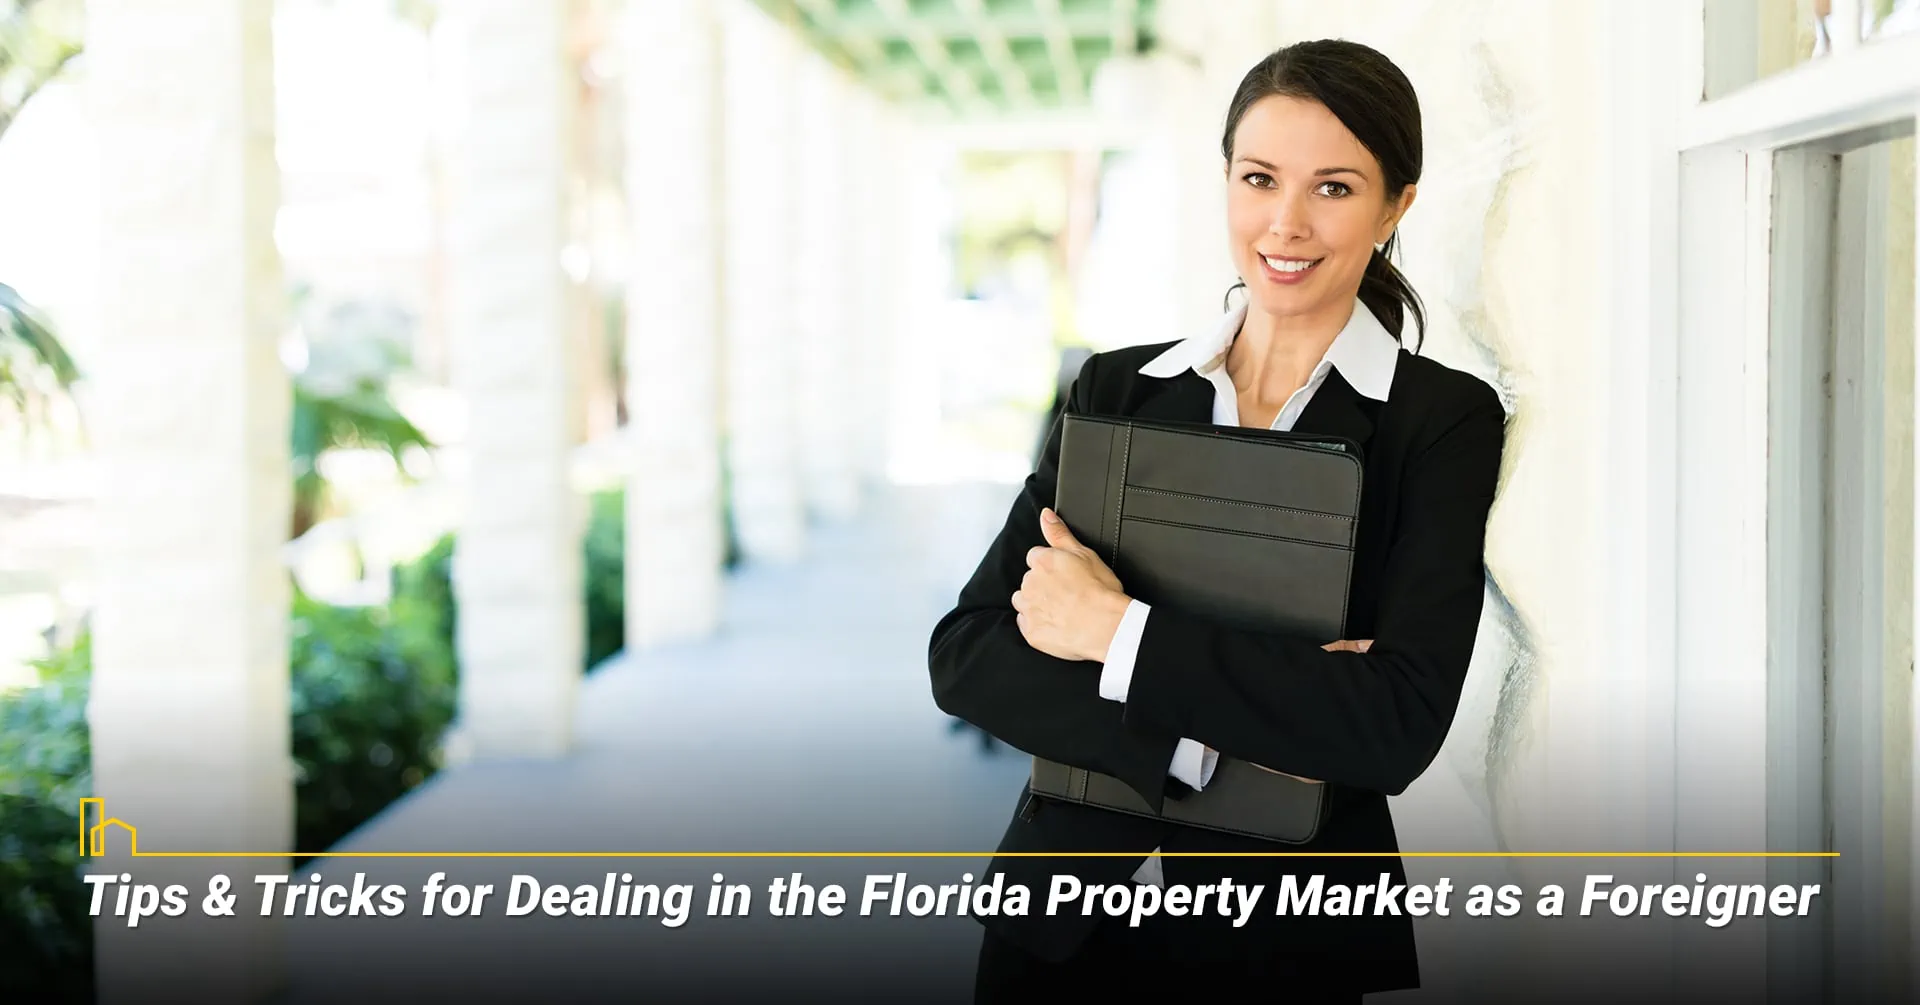 Tips & Tricks for Dealing in the Florida Property Market as a Foreigner